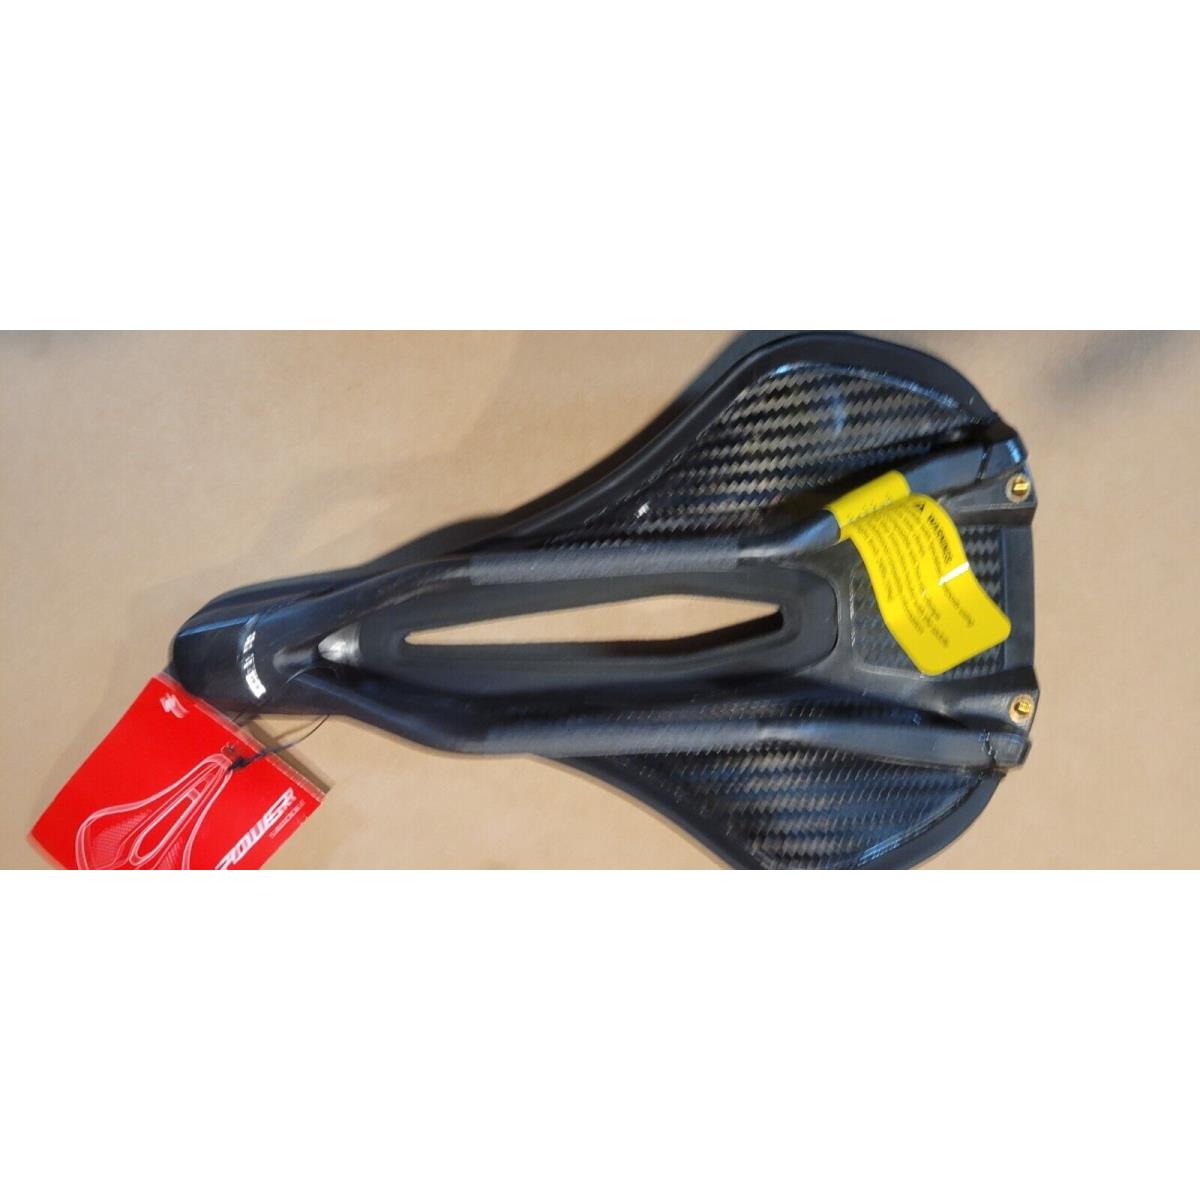 Specialized S-works Power Arc 155 mm Carbon Saddle - 27118-1705